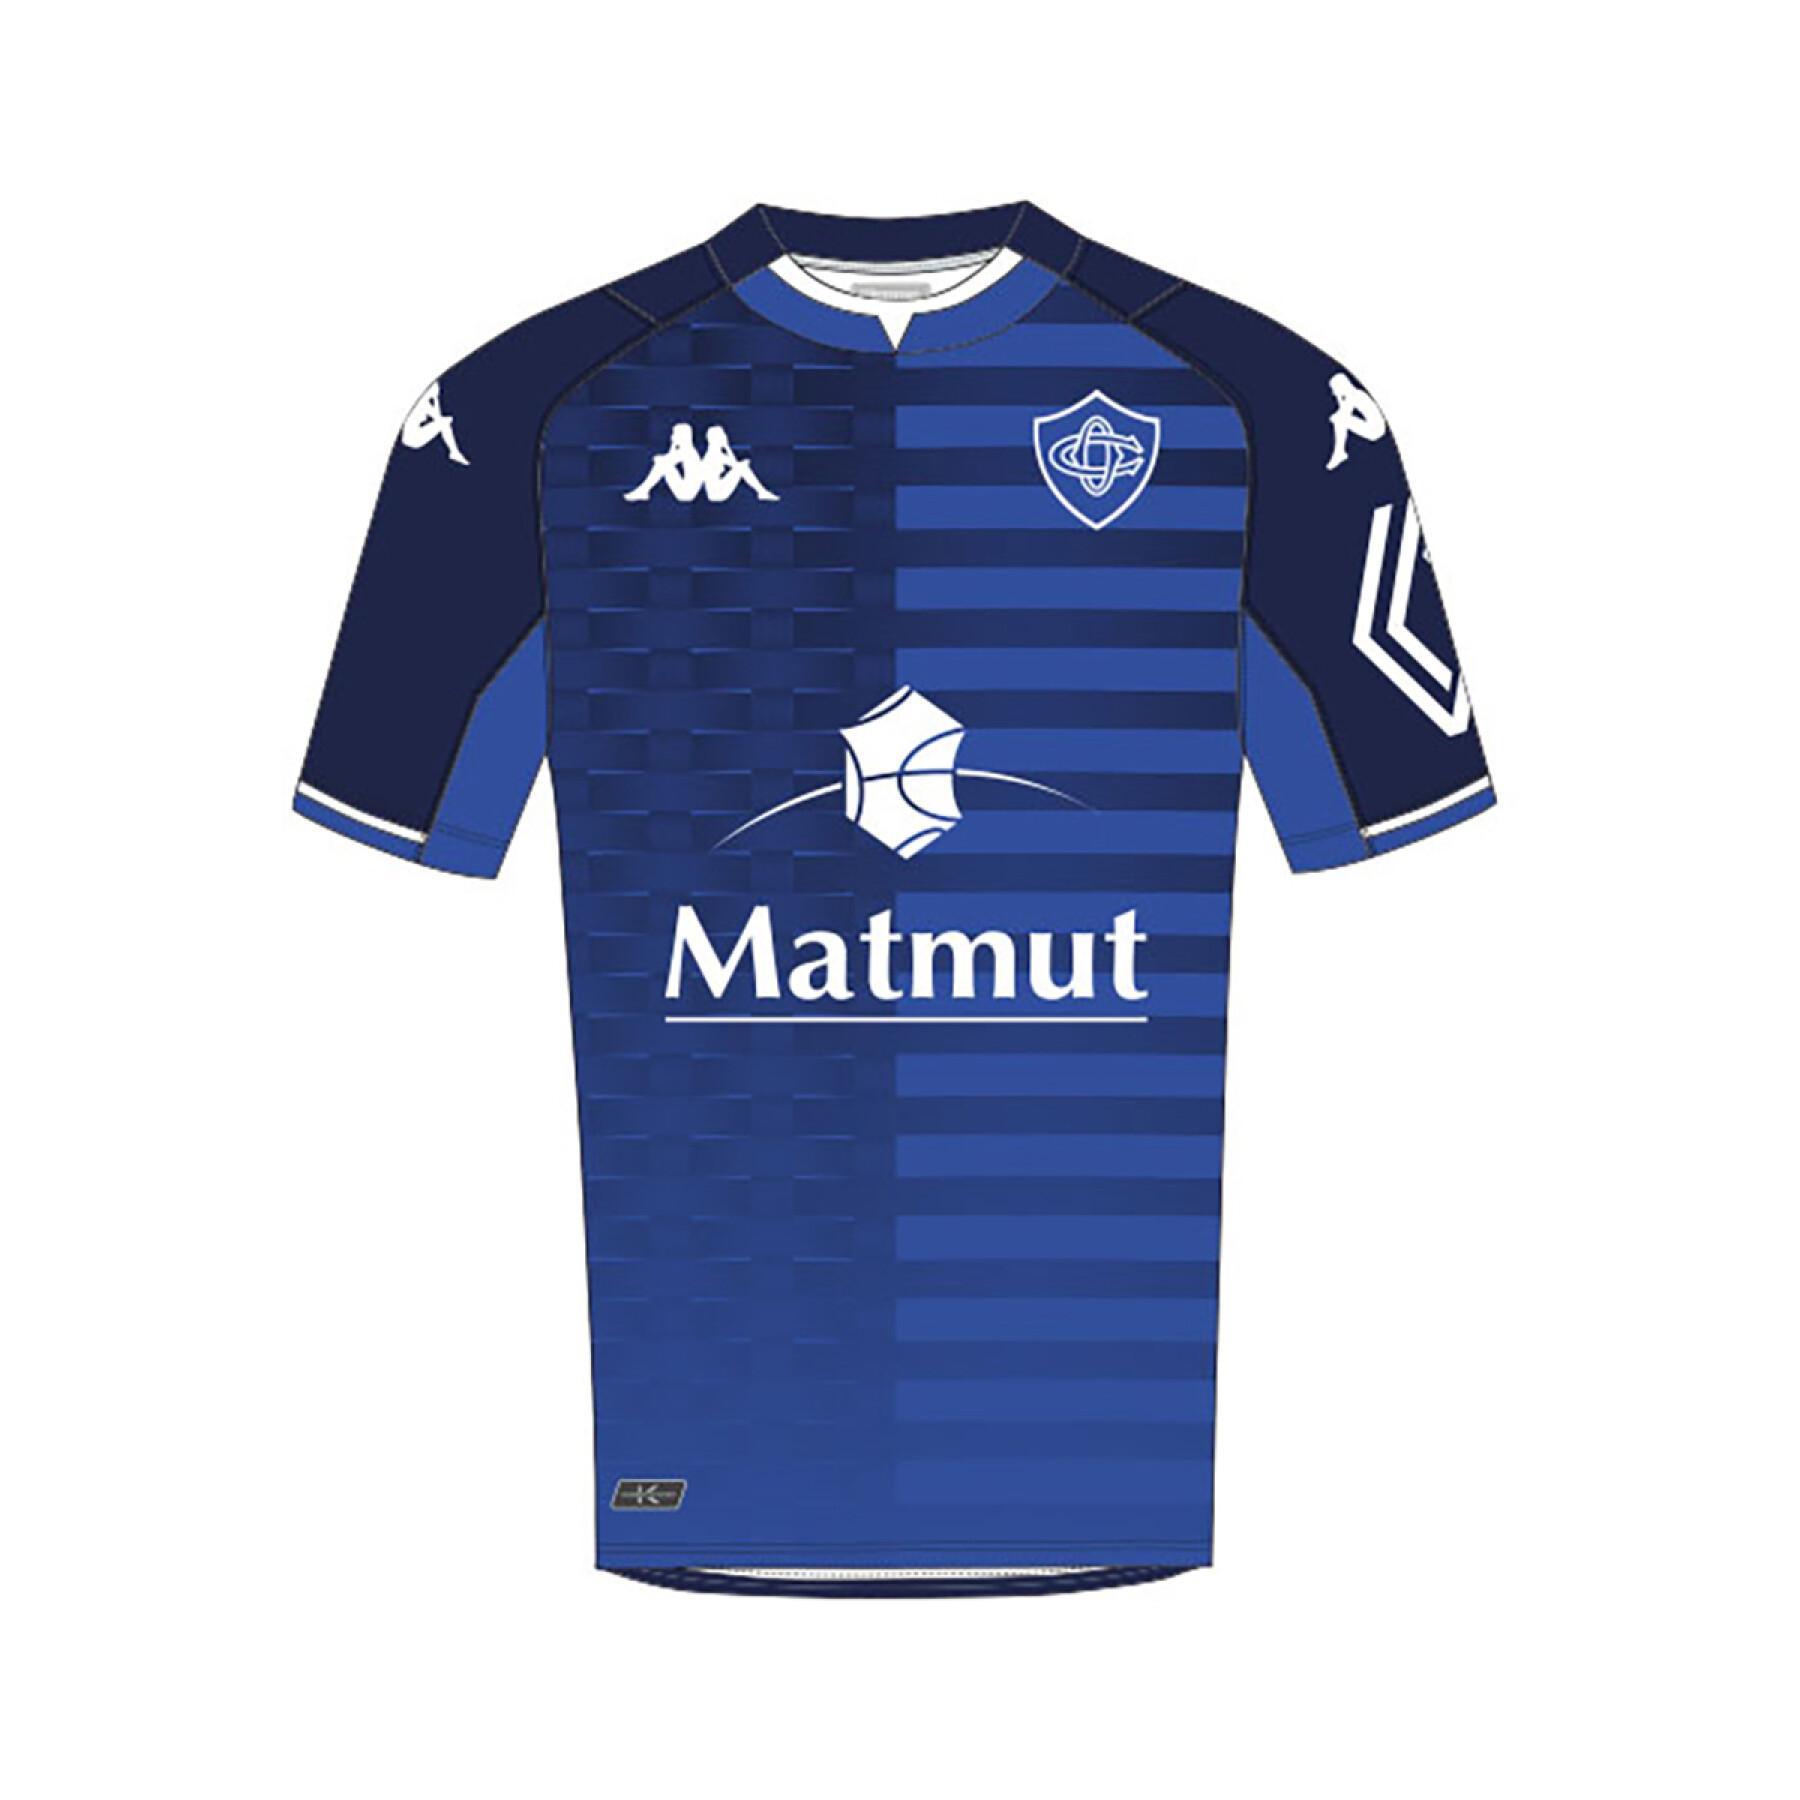 Home jersey Castres Olympique 2021/22